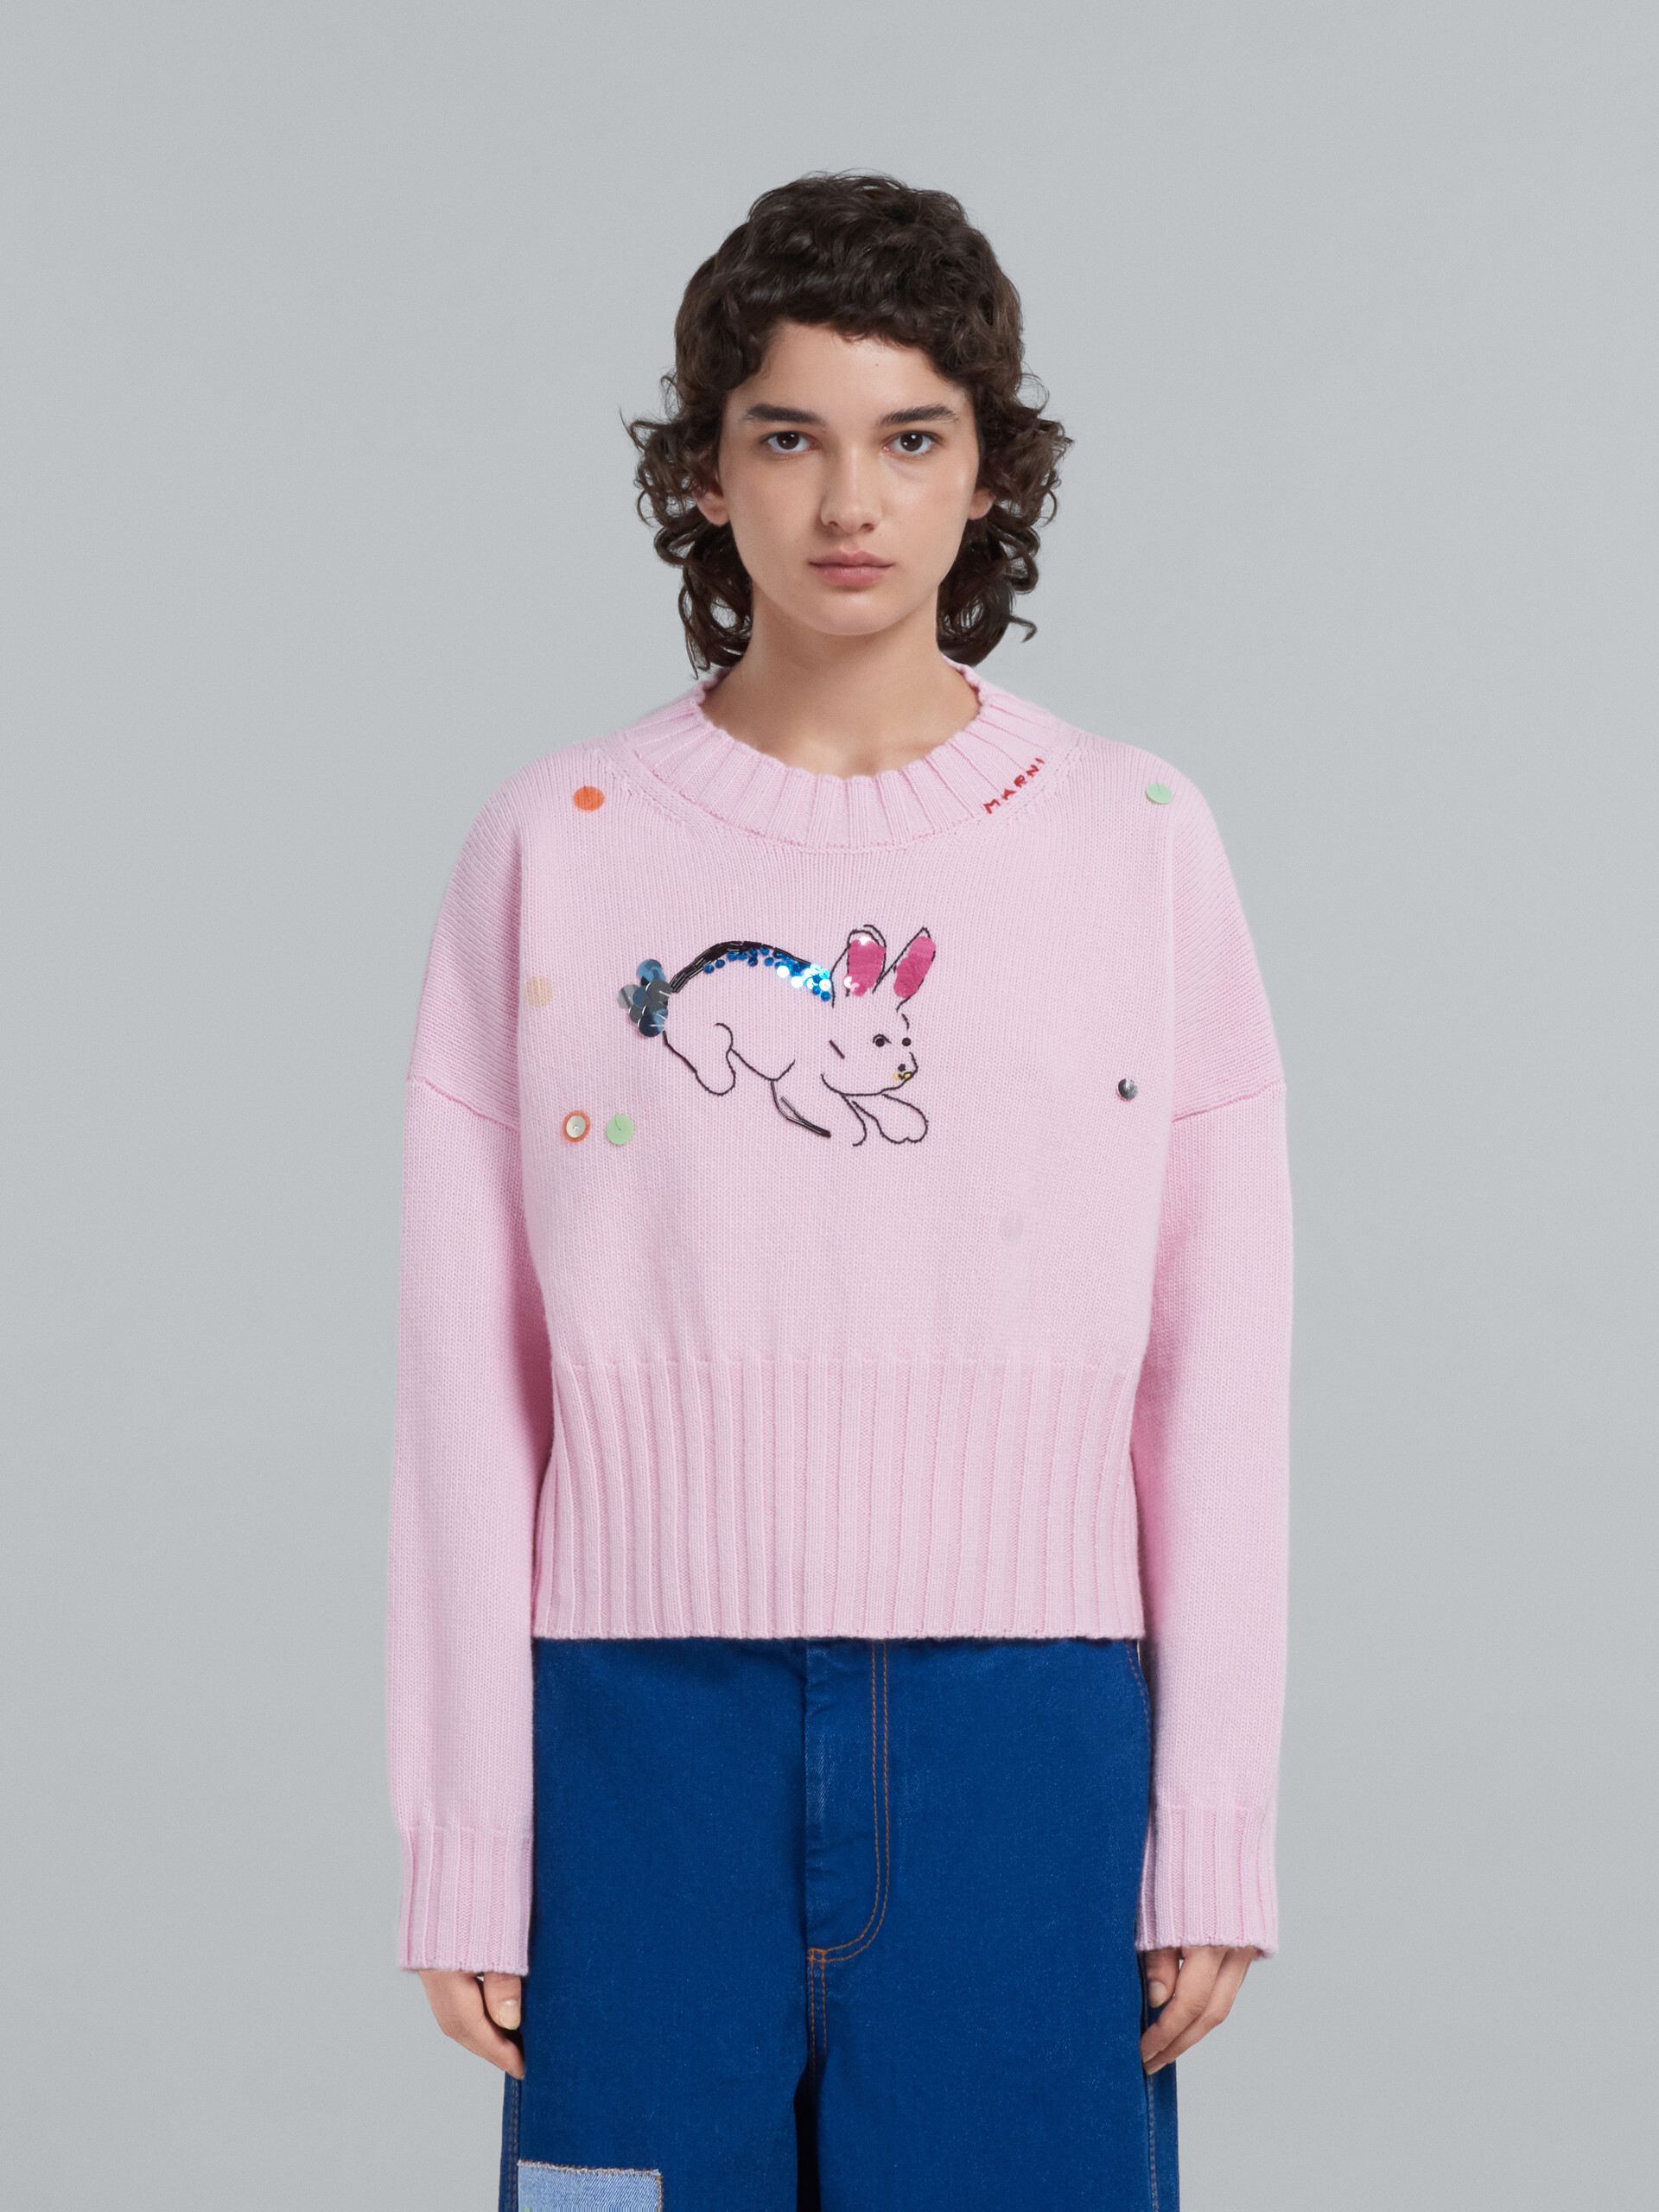 Sweater with rabbit embroidery - Pullovers - Image 2